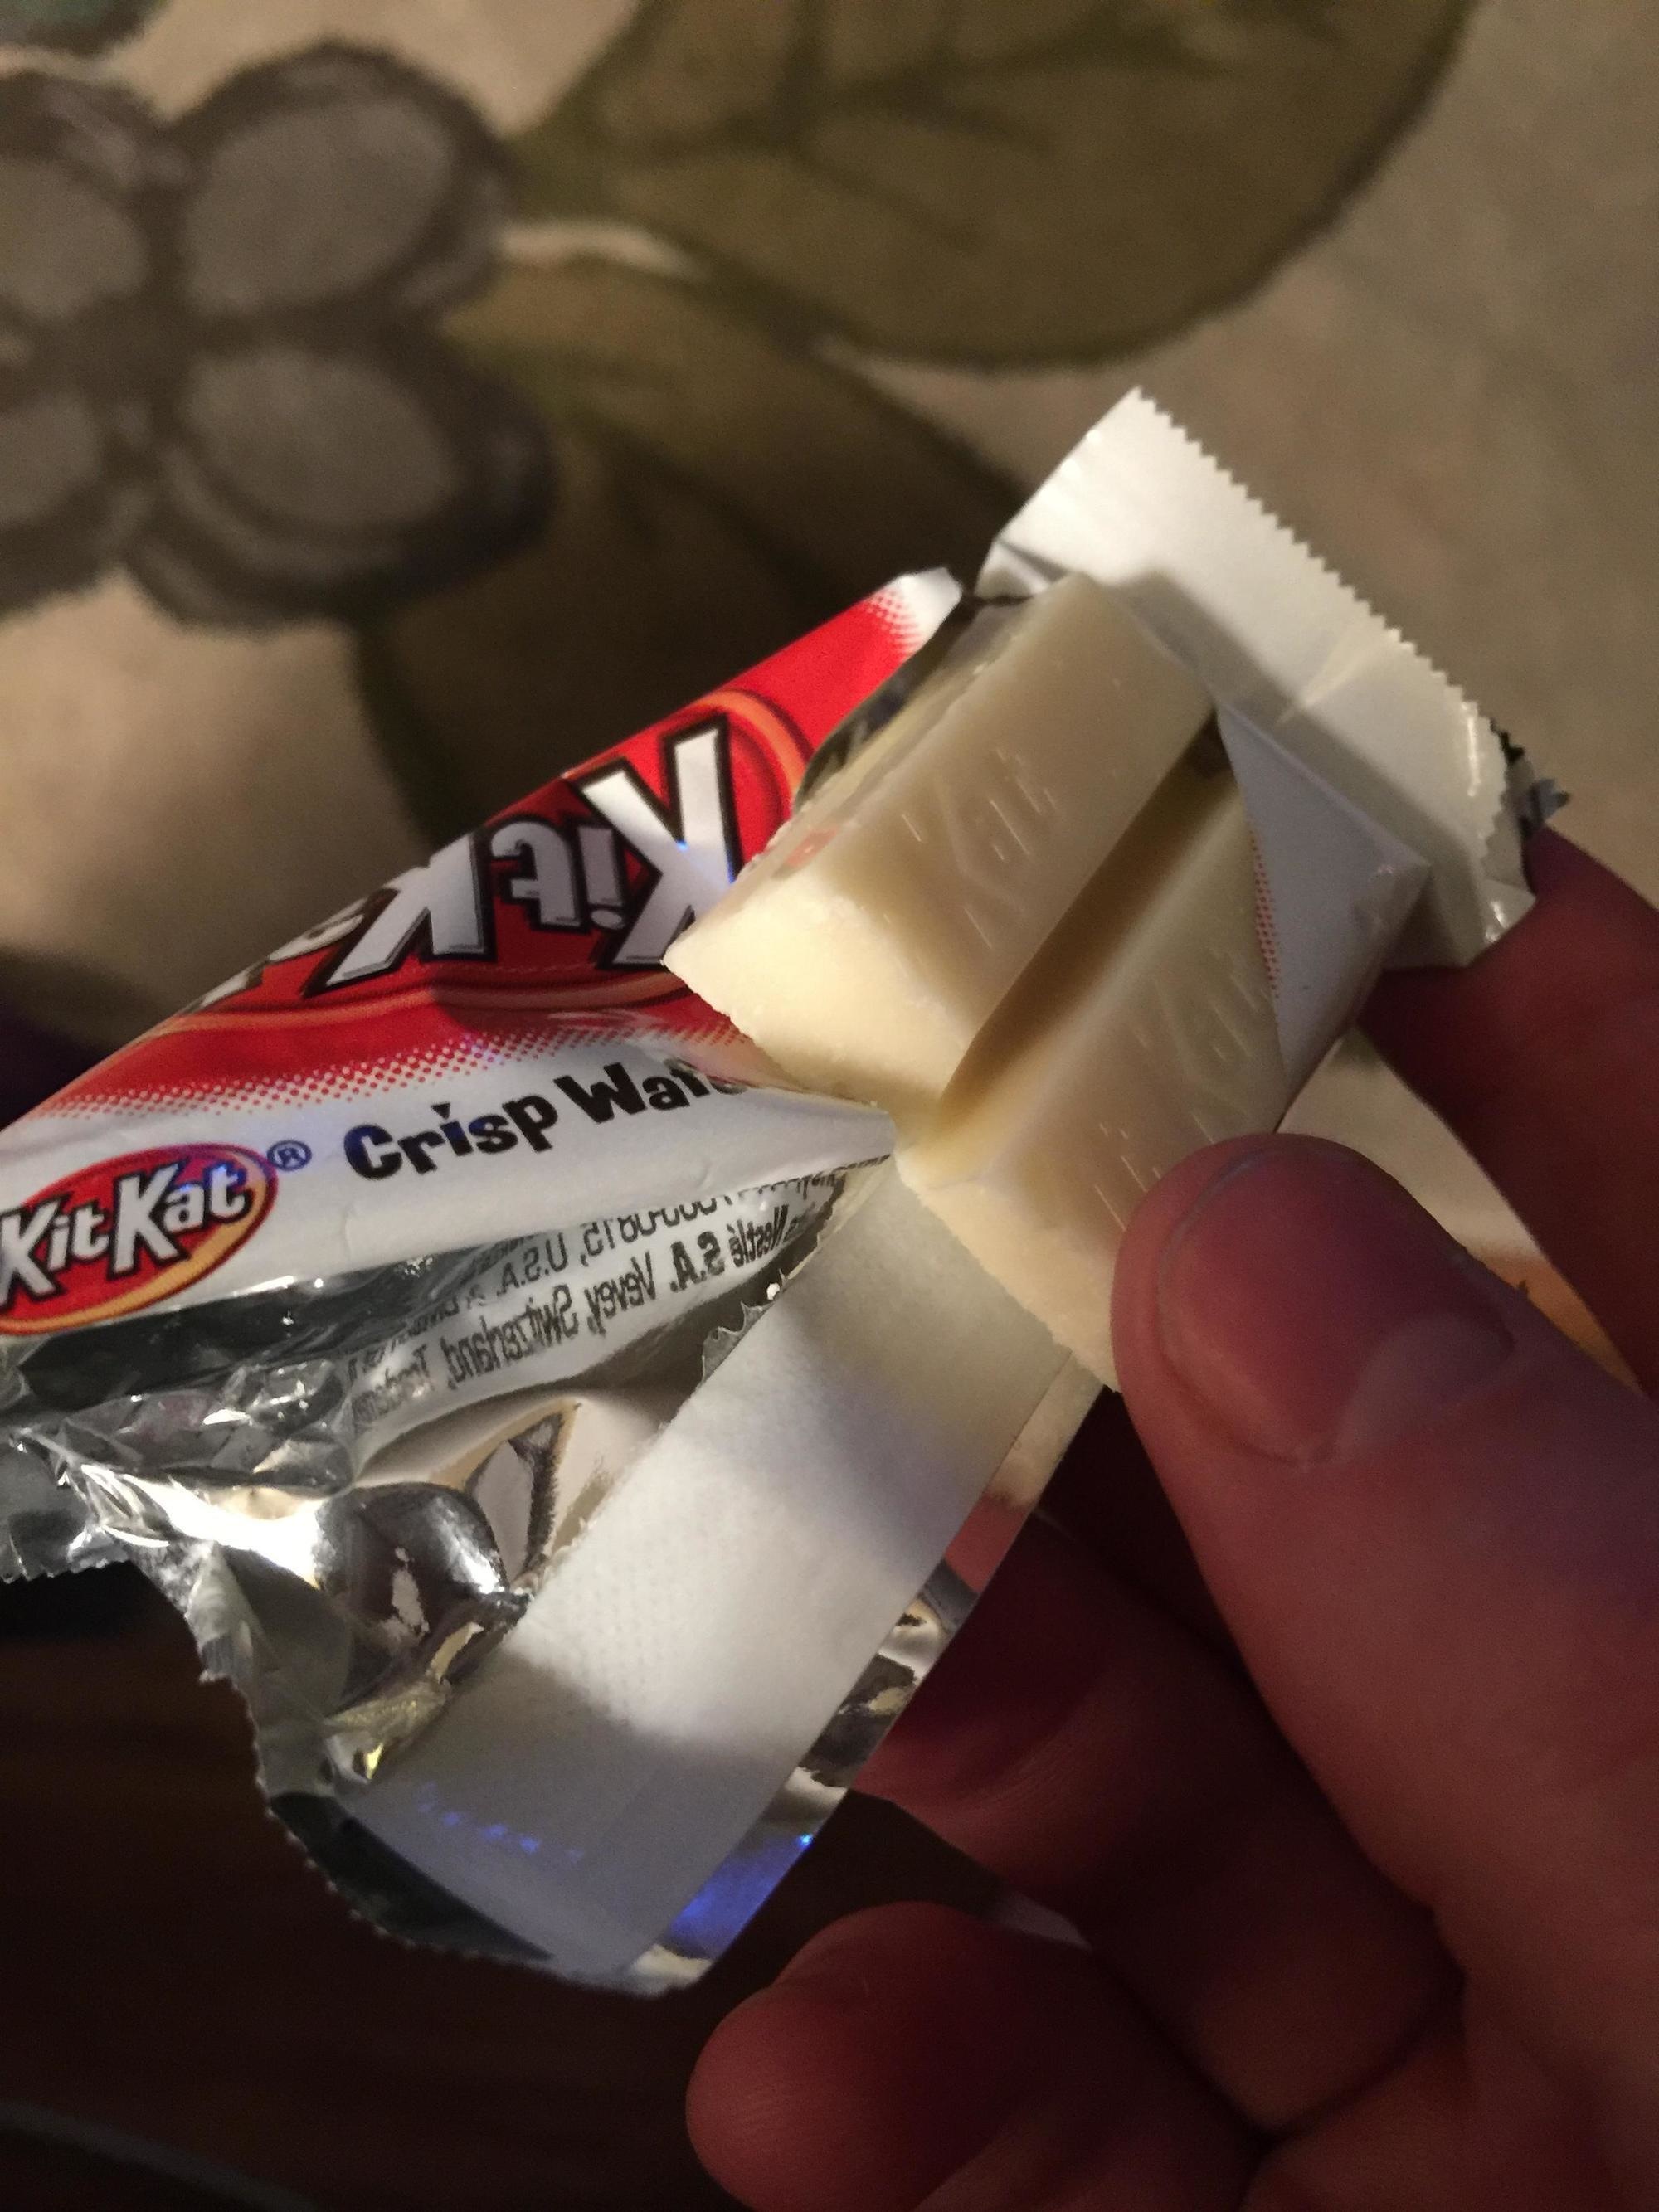 The white chocolate Kit Kat that was all white chocolate.